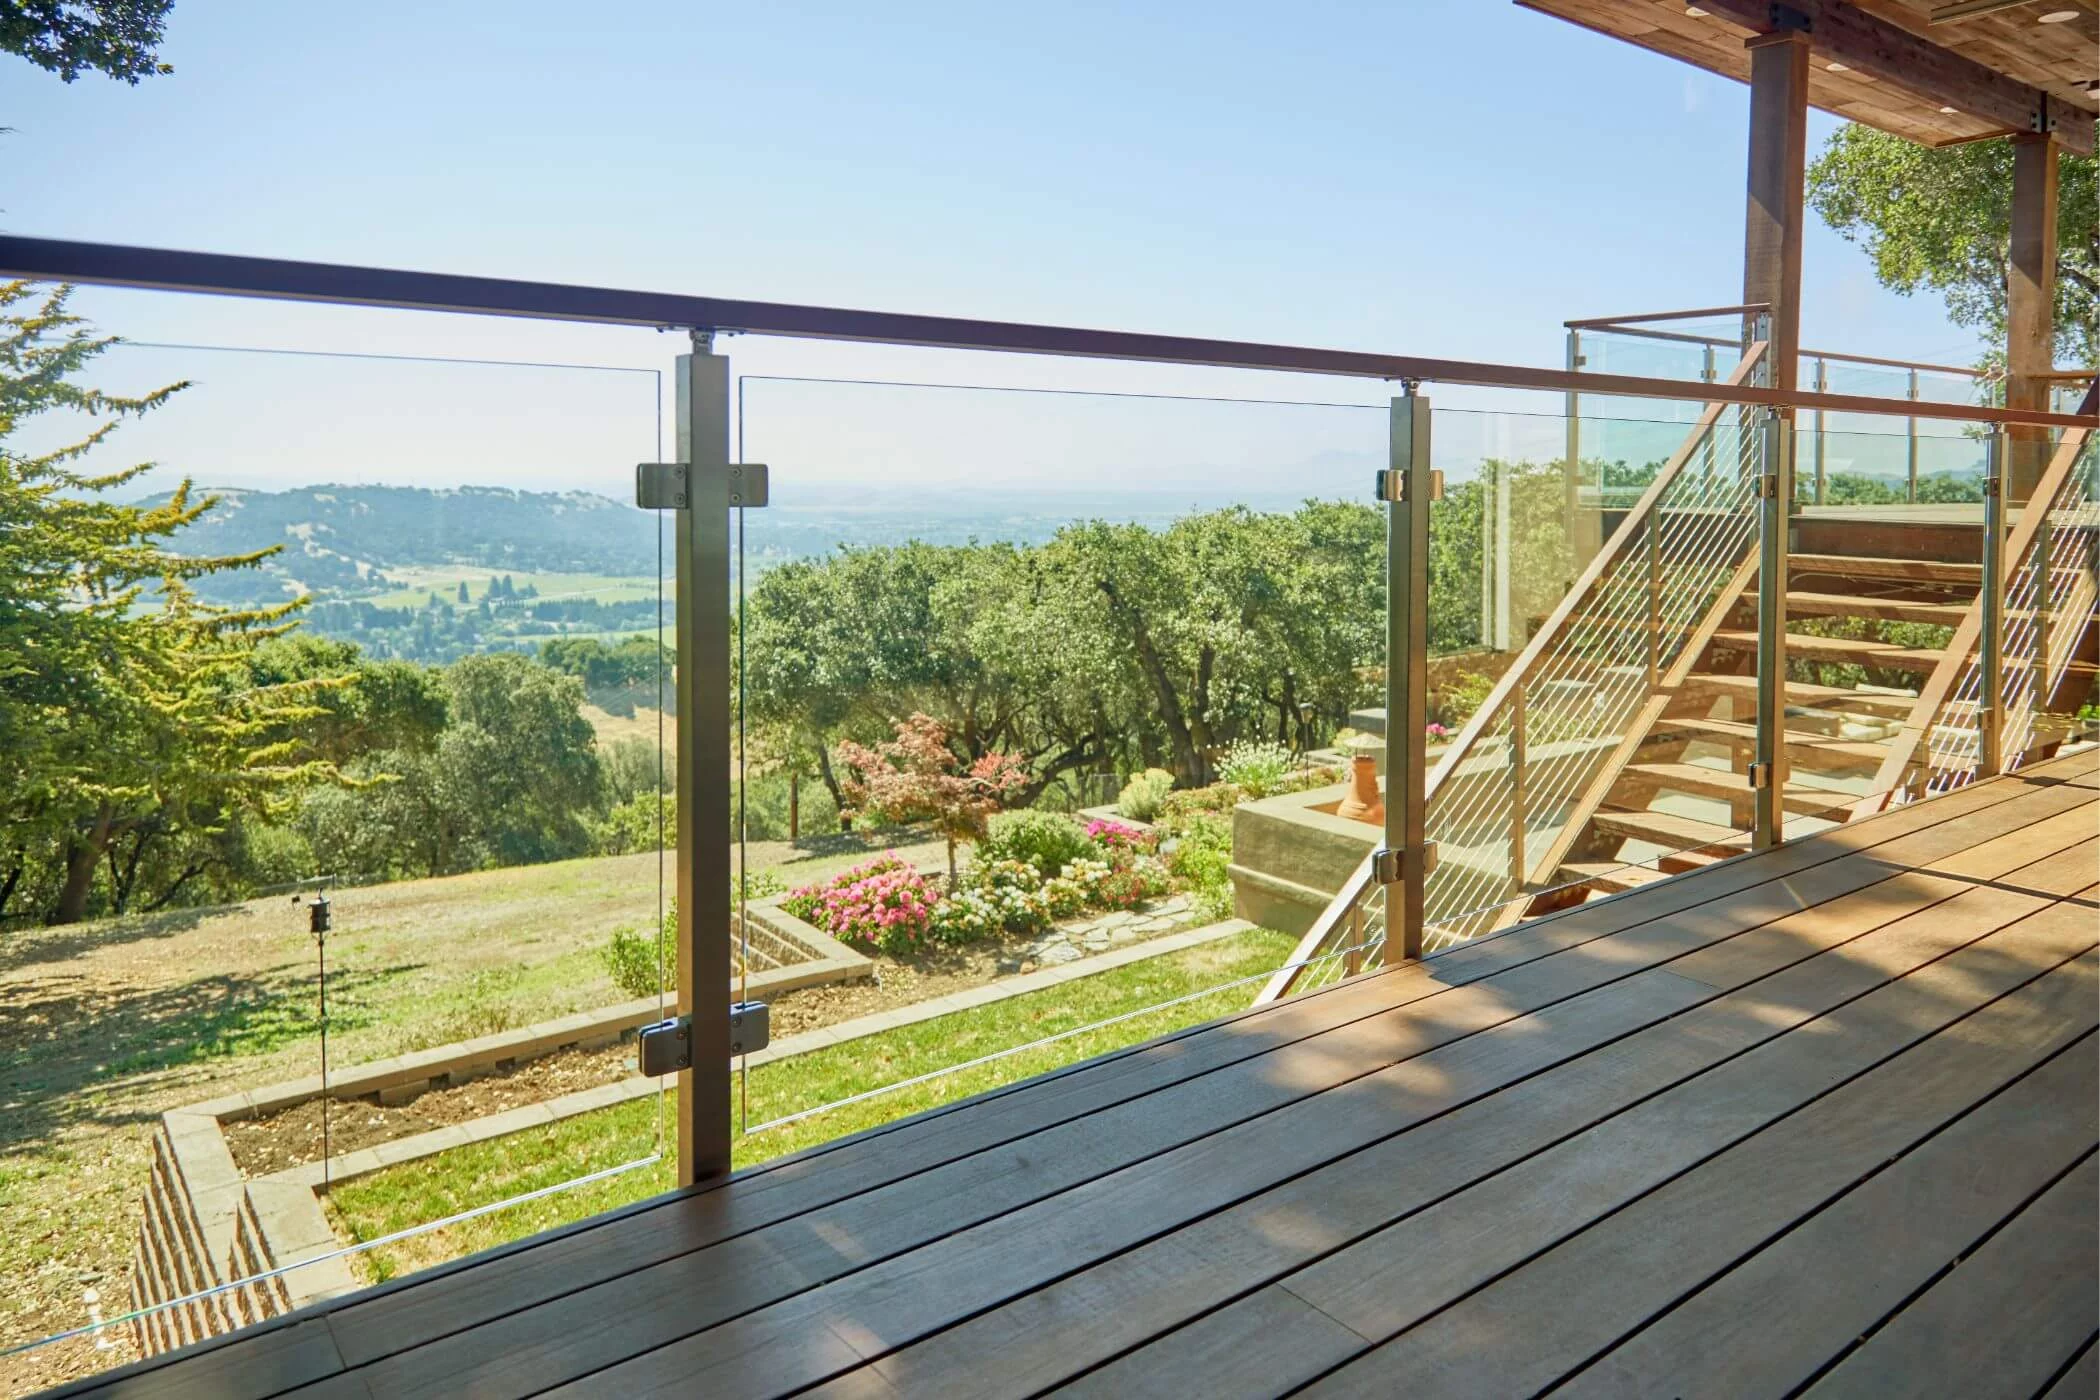 Glass Railing for a Scenic Deck - Viewrail